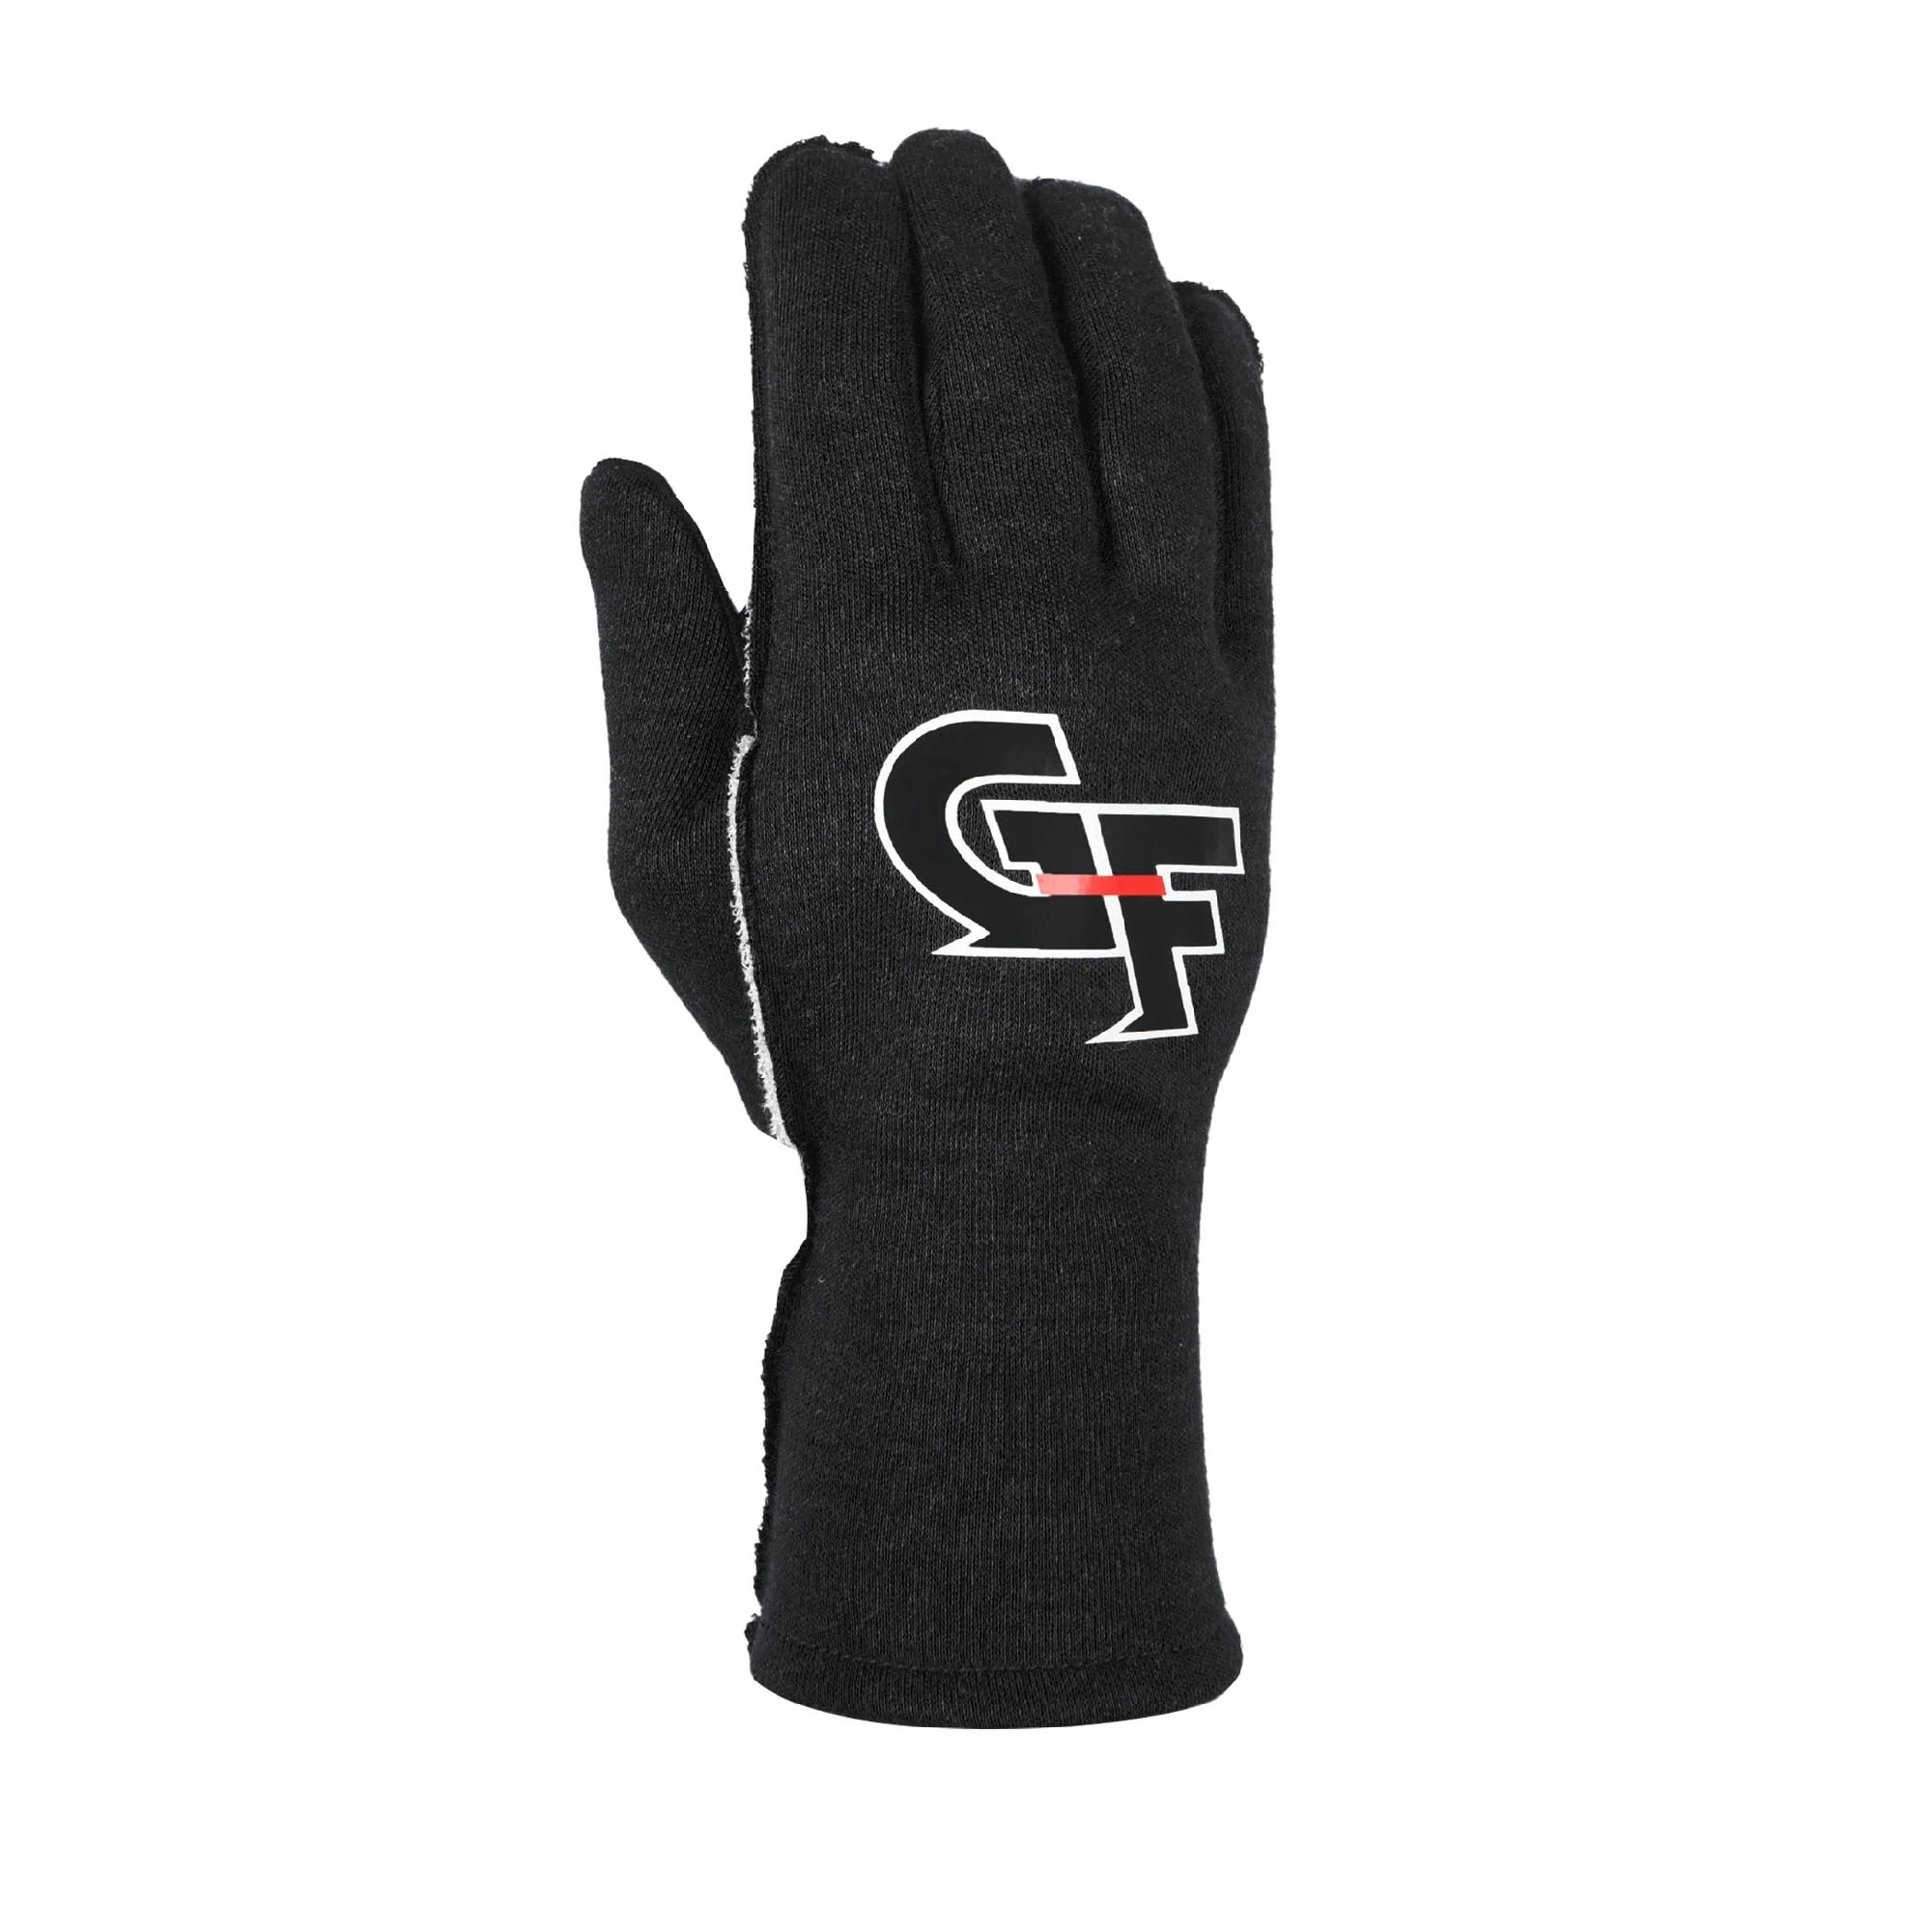 G-FORCE Gloves G-Limit XX-Small Black